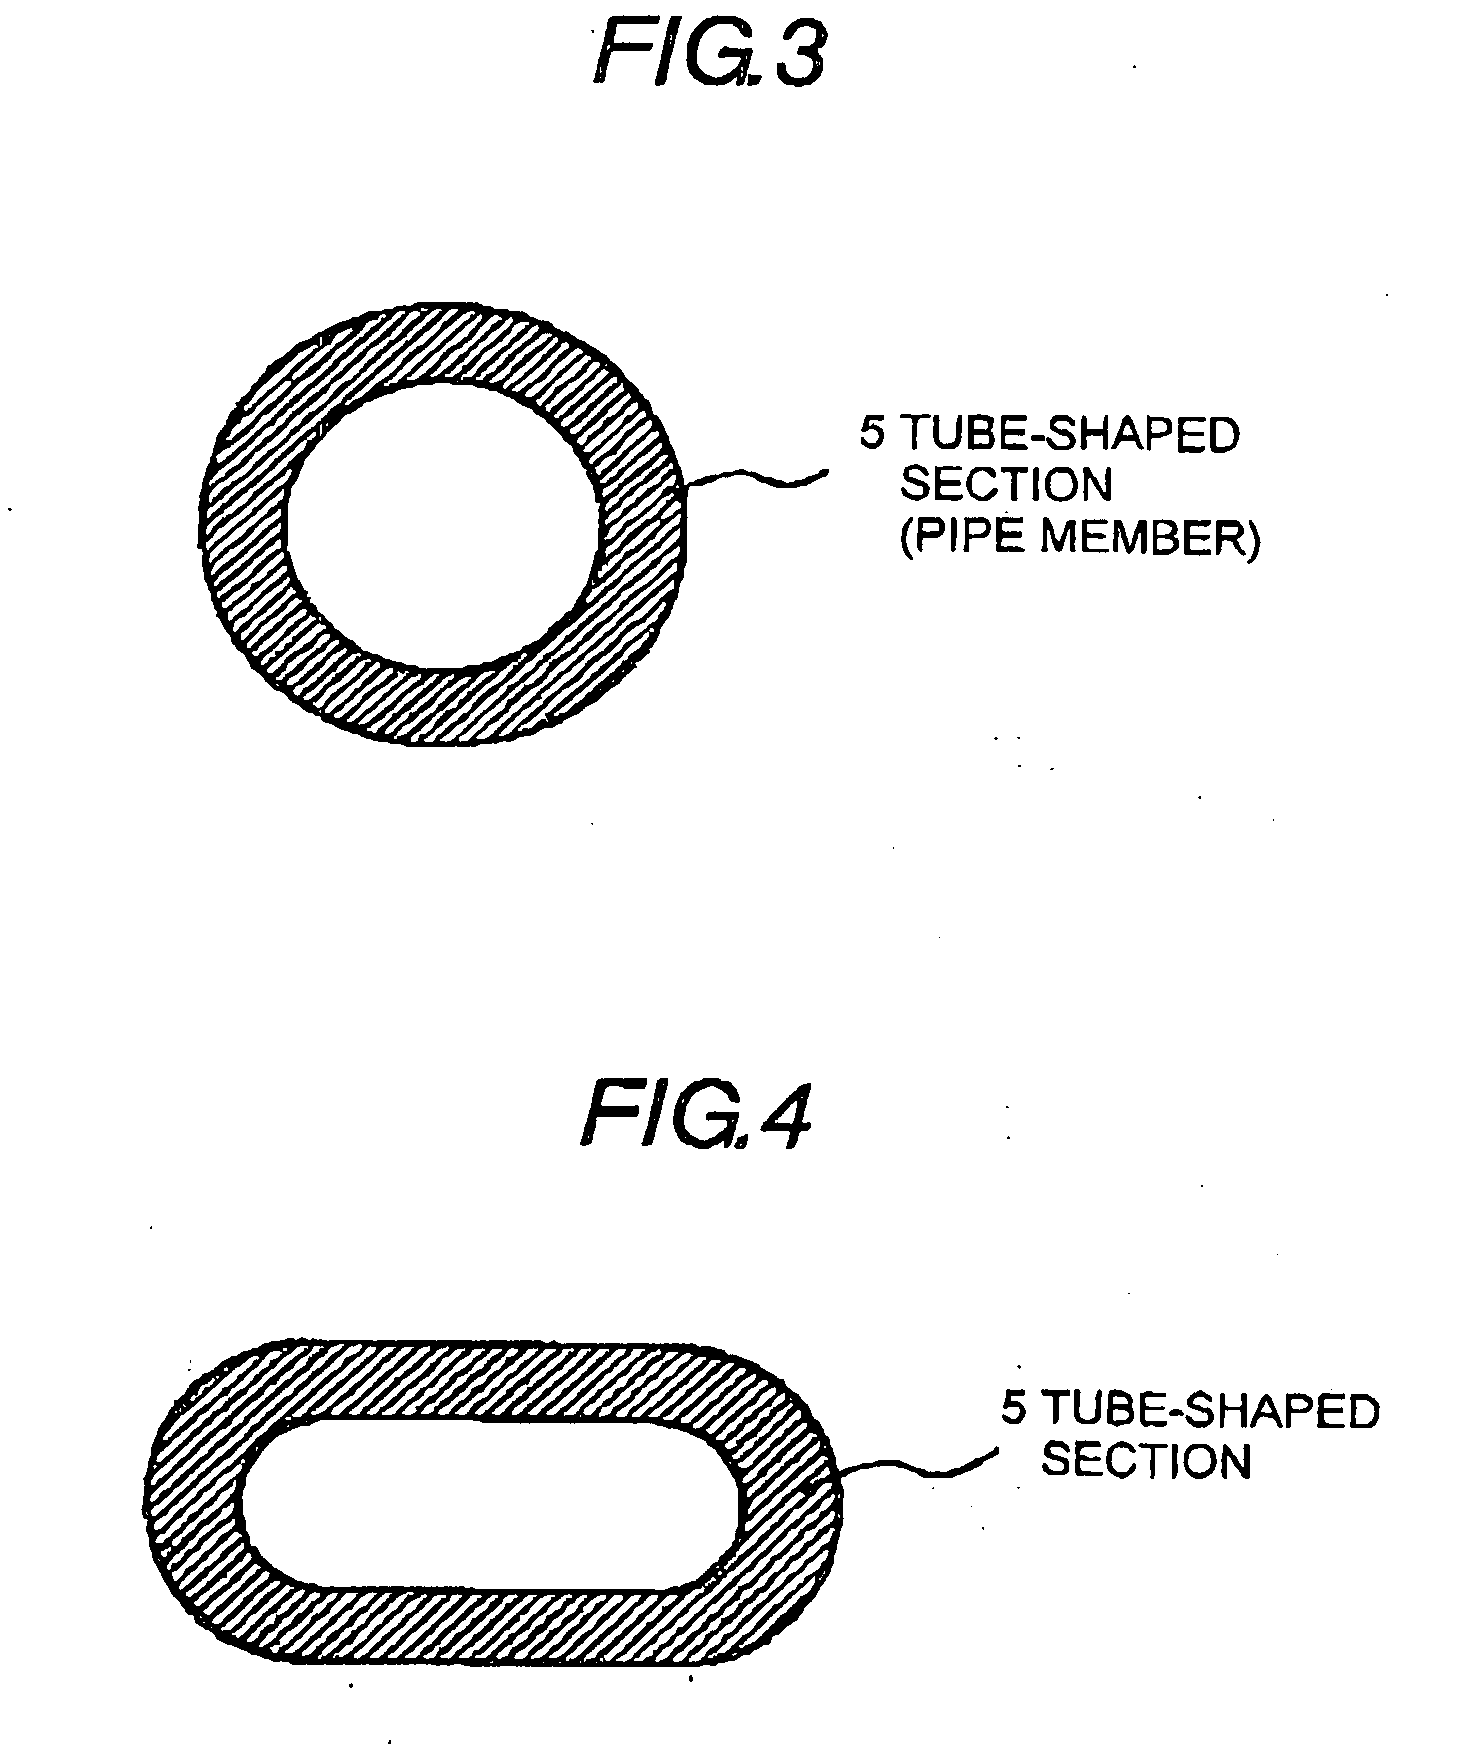 Wiring Material, Method for Manufacturing Such Wiring Material and Resistance Welding Apparatus Used in Such Manufacturing Method